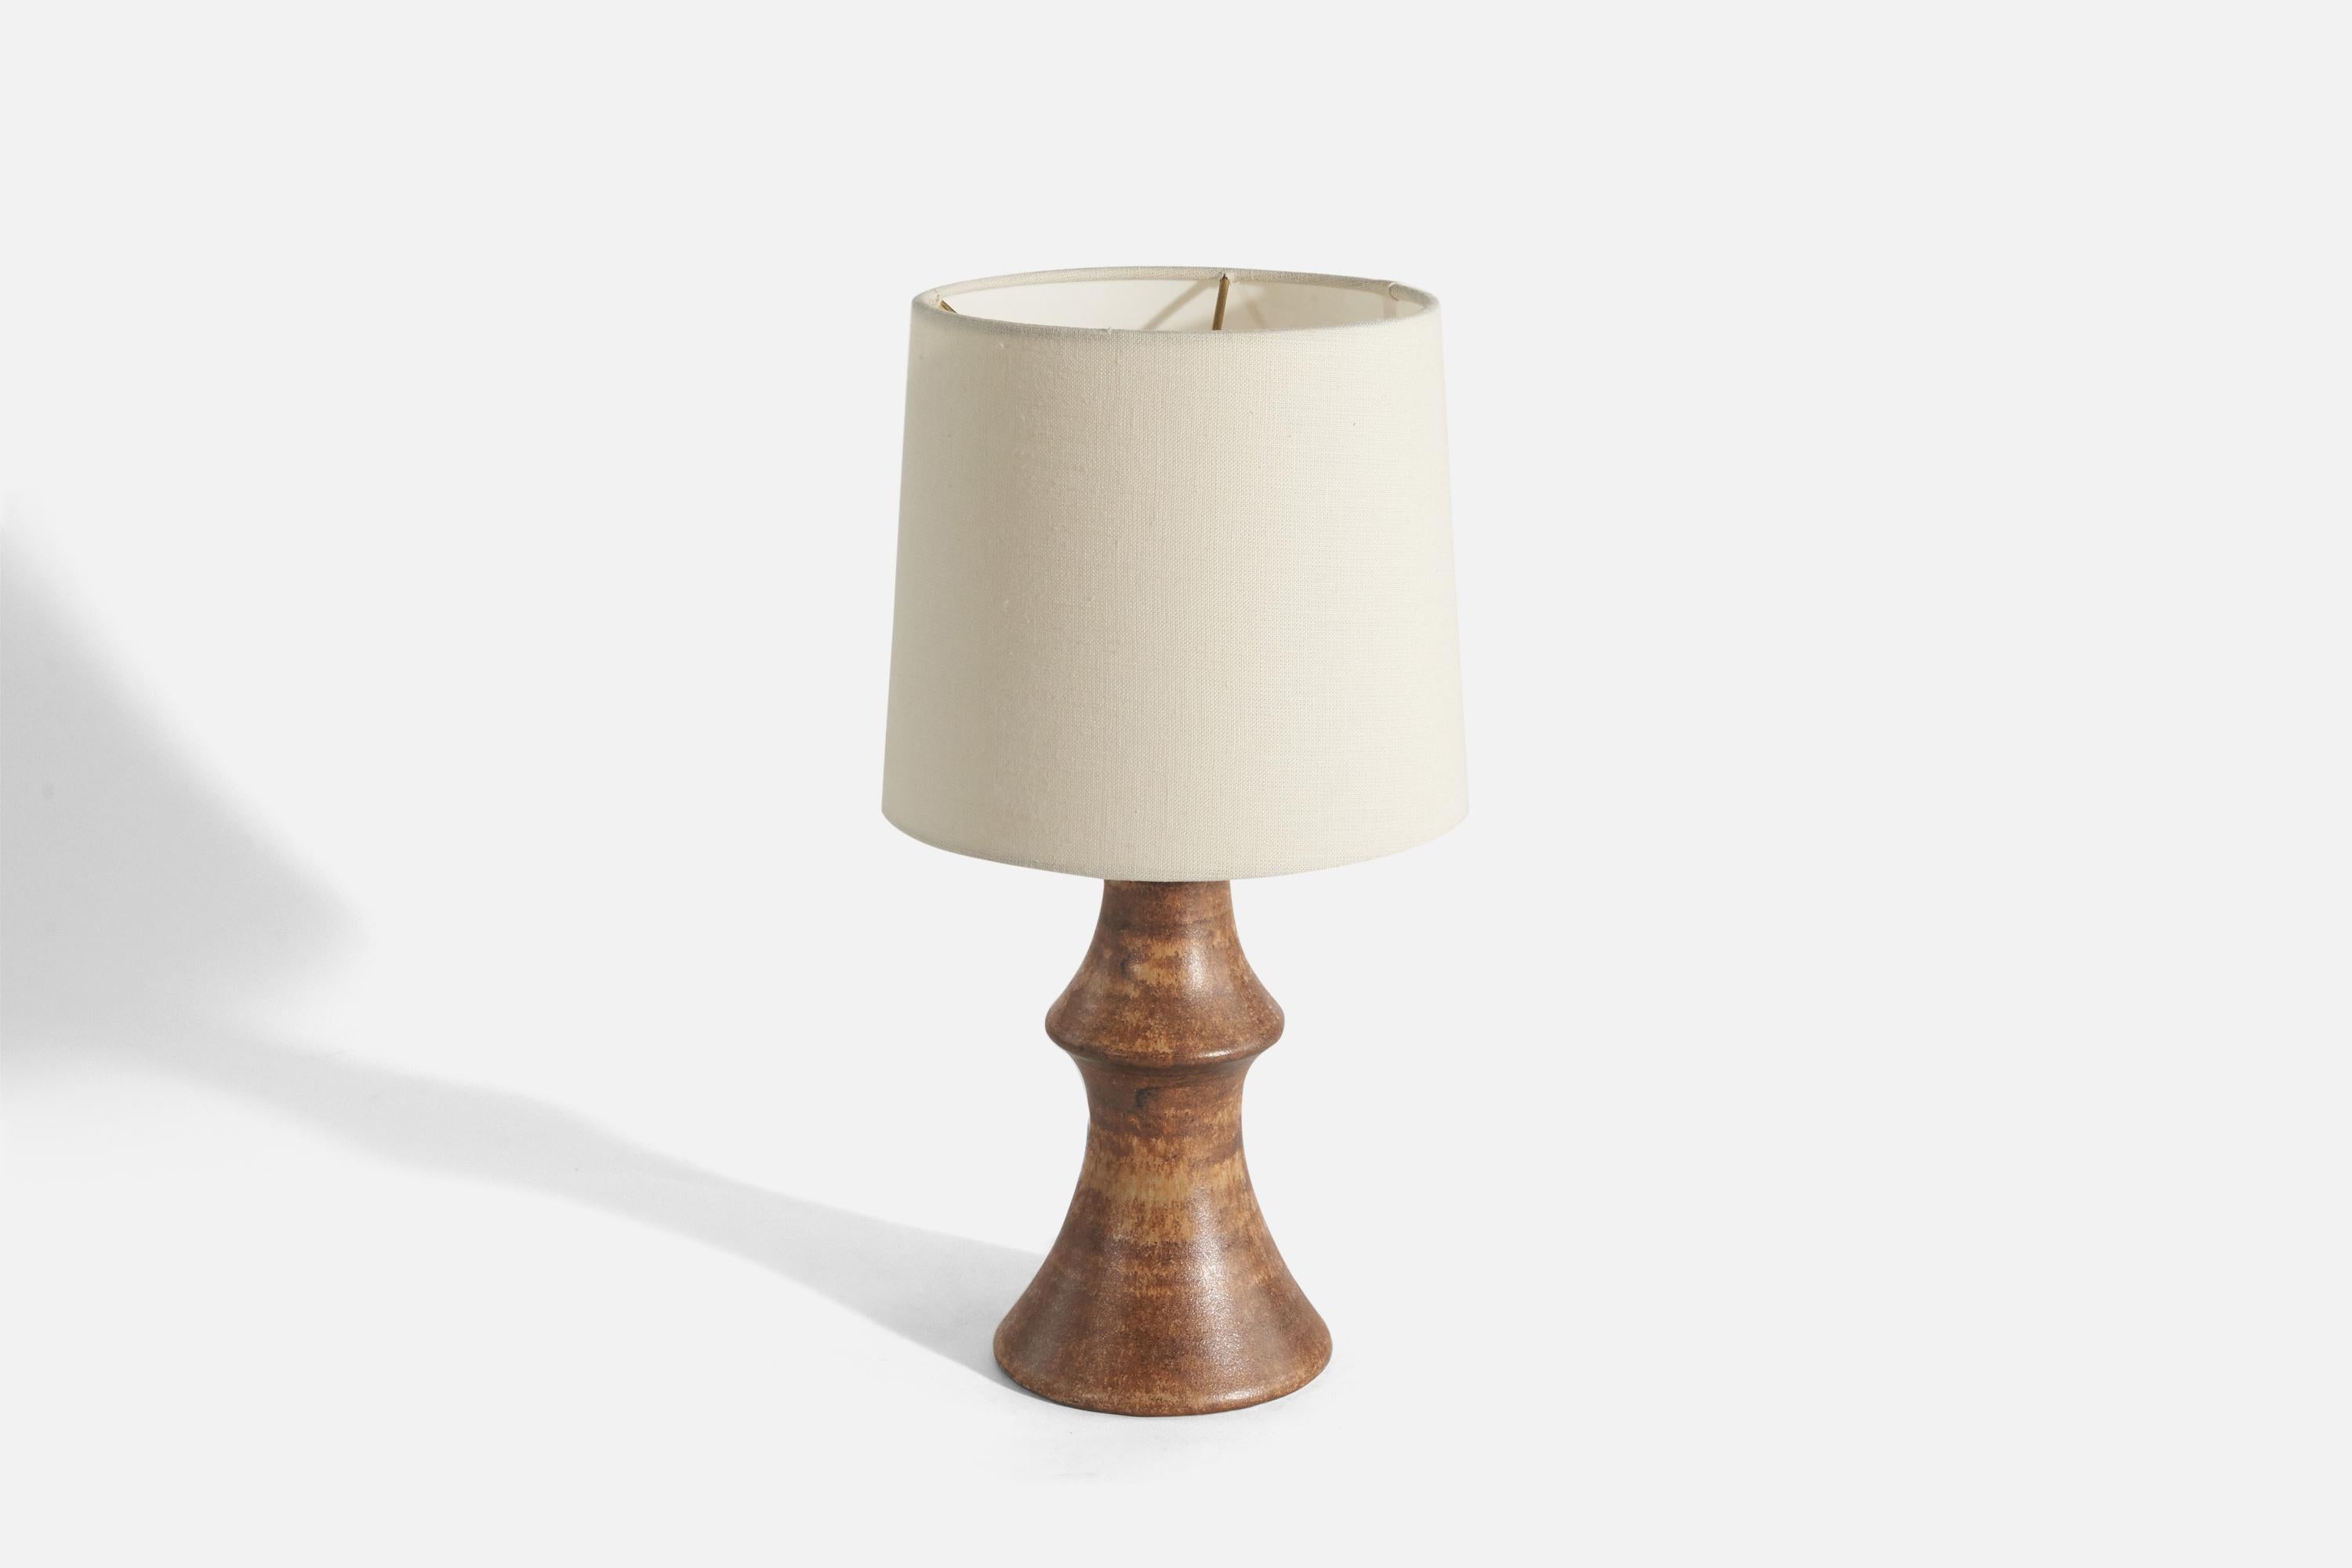 A brown-glazed stoneware table lamp designed by Bruno Karlsson and produced by his own studio 